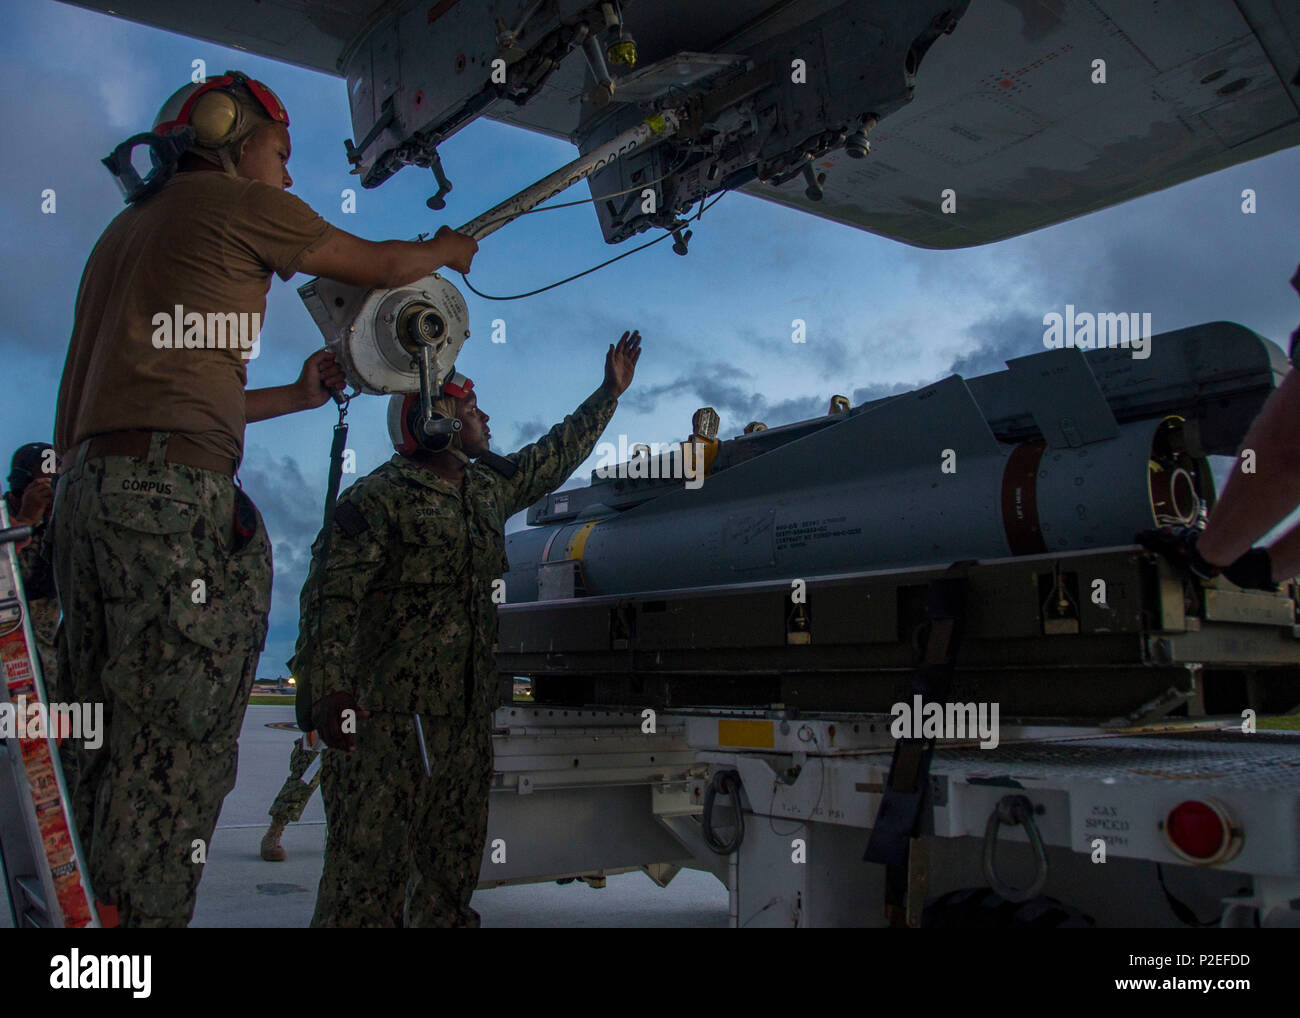 GUAM (September 13, 2016) – Aviation Ordnanceman 3rd Class Donta Stone and Aviation Ordnanceman Airman Ederson Corpus assigned to Patrol Squadron (VP) 46 load an AGM-65F Maverick air-to-surface missile on a P-3C Orion aircraft during Exercise Valiant Shield. Valiant Shield focuses on integrated joint training among U.S. military forces, enabling real-world proficiency in sustaining joint forces and in detecting, locating, tracking and engaging units at sea, in the air, on land and cyberspace in response to a range of mission areas. (U.S. Navy photo by Mass Communication Specialist 3rd Class Al Stock Photo